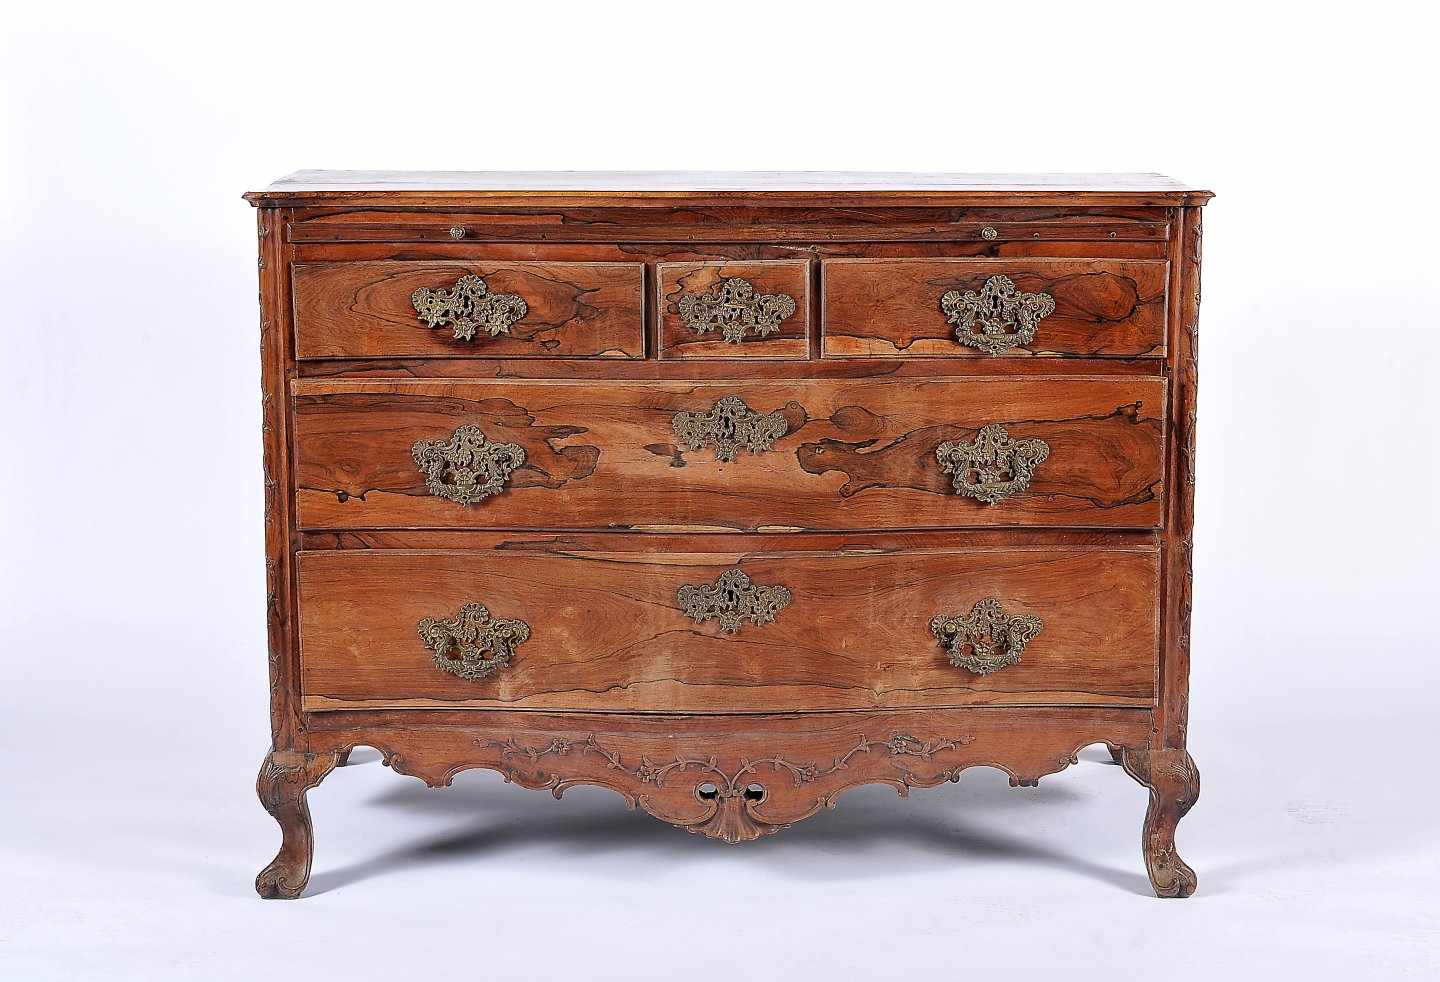 A Chest of Drawers with Pull-out TopA Chest of Drawers with Pull-out Top, D. José I, King of - Image 2 of 2